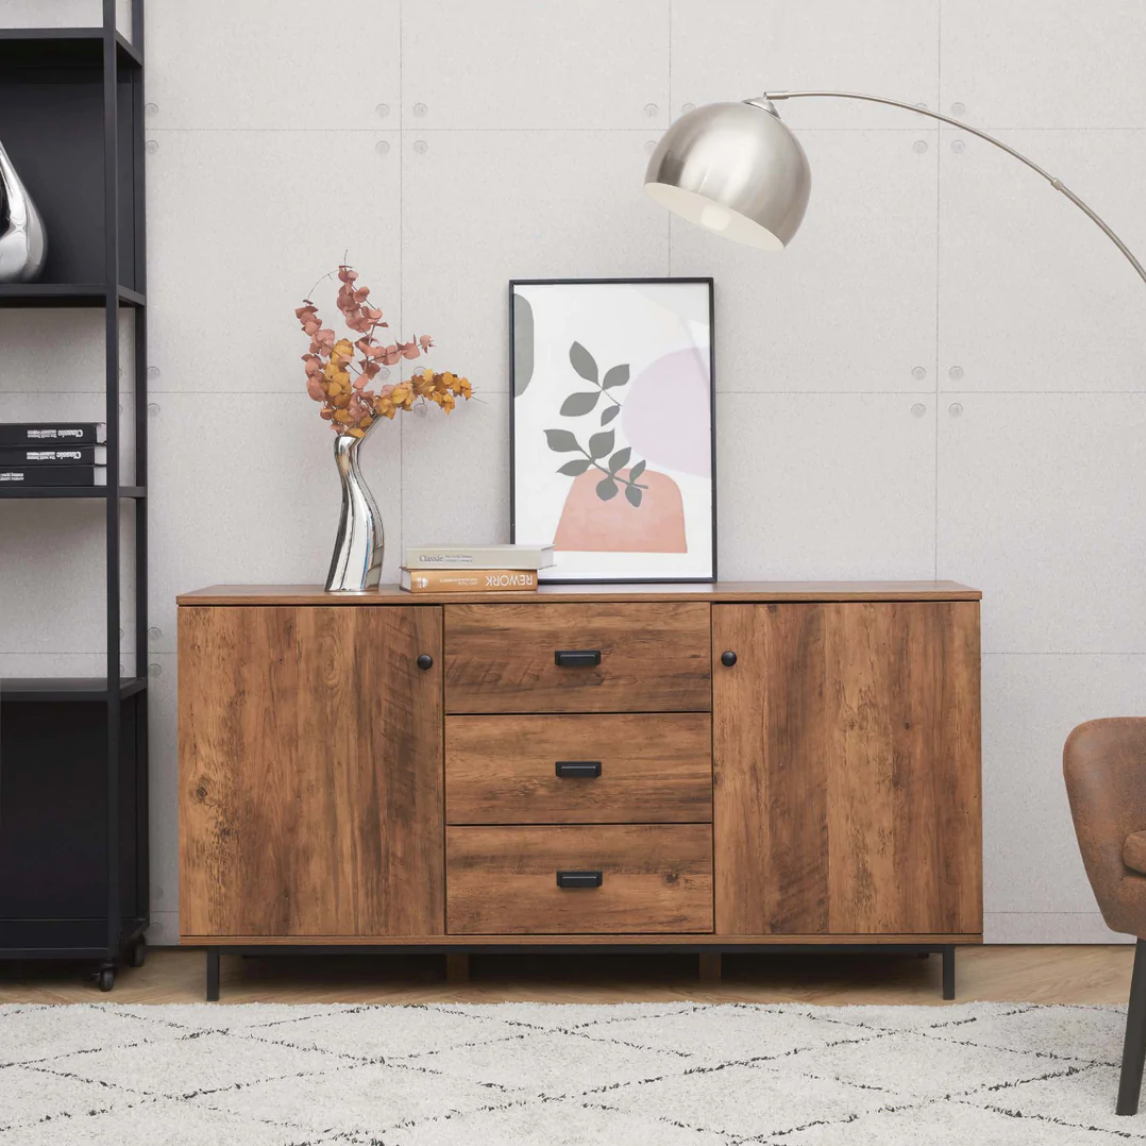 Light brown sideboard sits next to a white wall and features a flower painting resting above it.